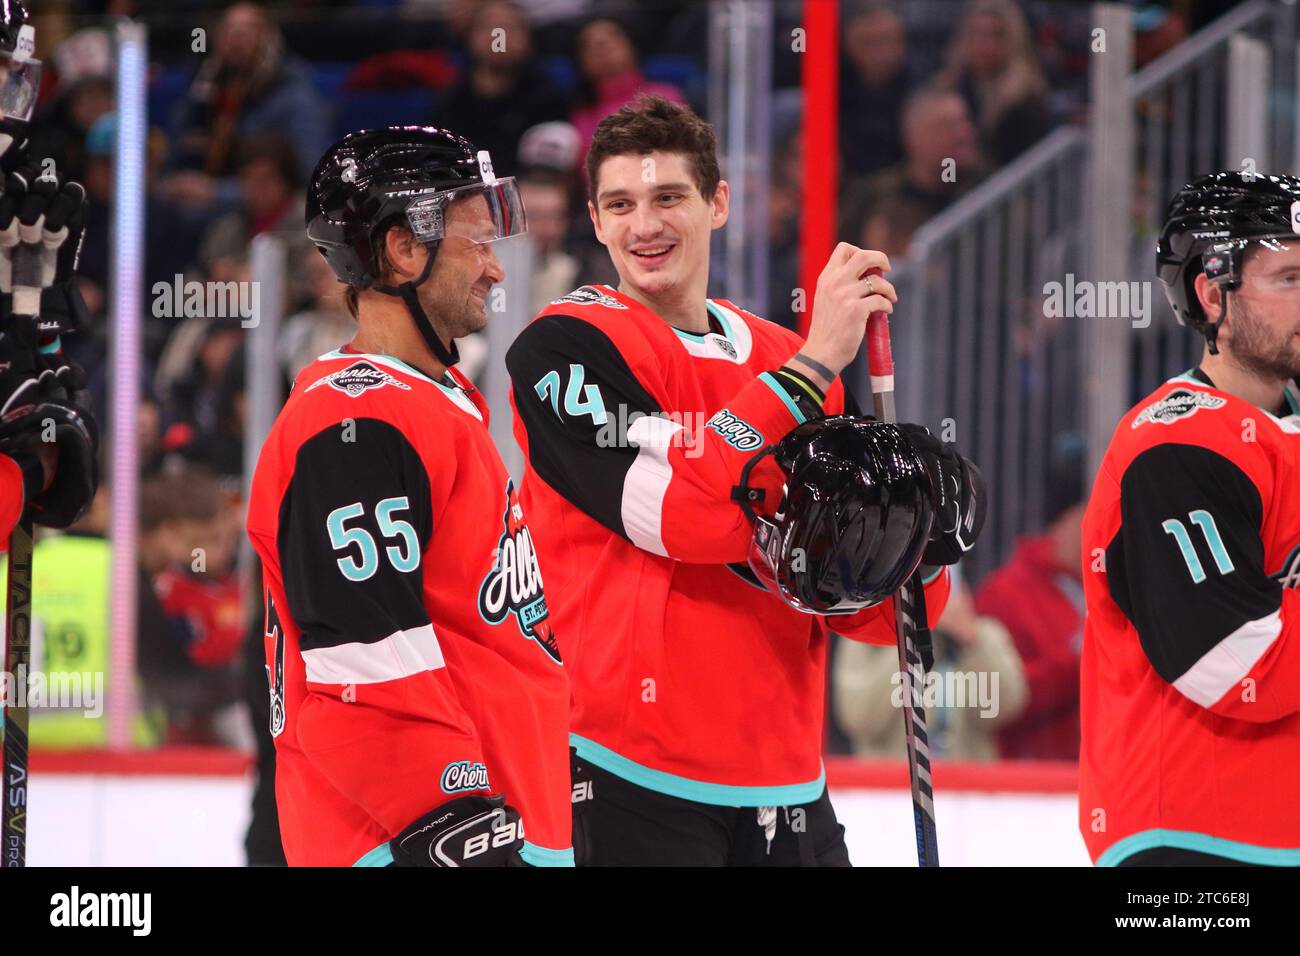 Saint Petersburg, Russia. 10th Dec, 2023. A player of the Nikolai Prokhorkin (74), Div. Chernysheva hockey team at the Award Ceremony for the third place in the 2023 KHL All-Star Game at the SKA Arena in St. Petersburg, Russia. (Final score; Div. Bobrova 7:4 Div. Chernysheva) Credit: SOPA Images Limited/Alamy Live News Stock Photo